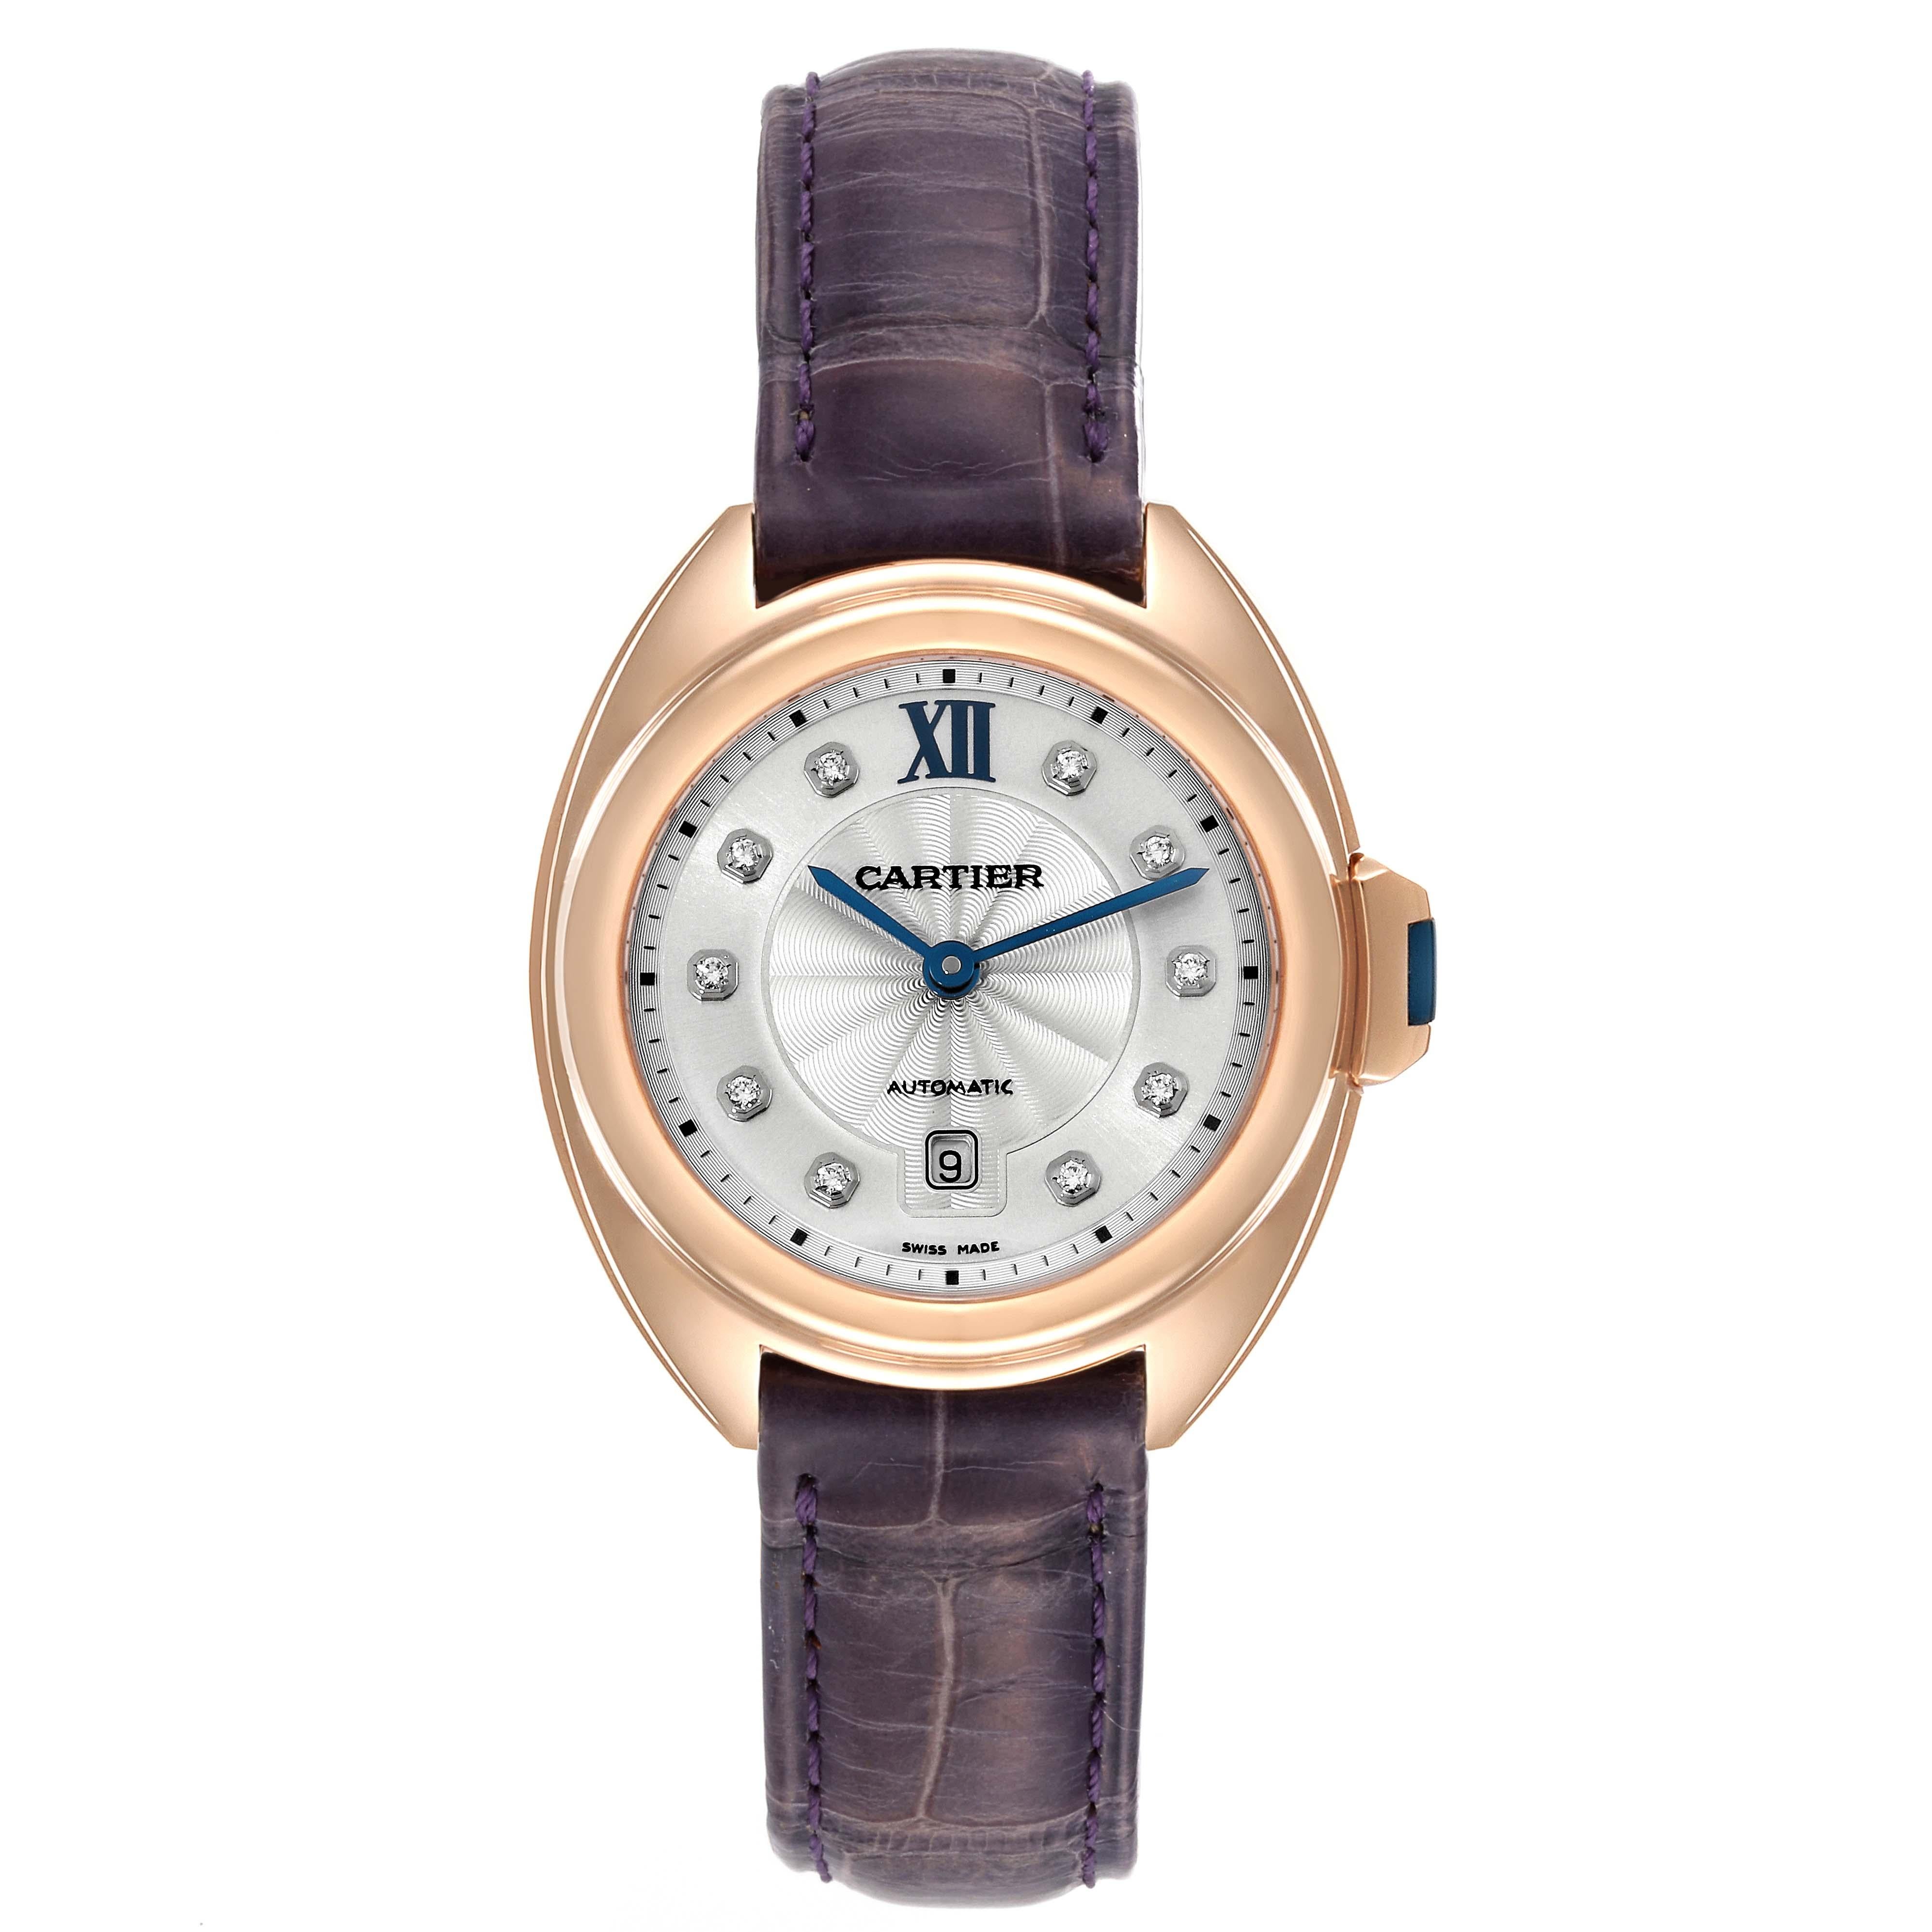 Cartier Cle Rose Gold Automatic Diamond Ladies Watch WJCL0031. Automatic self-winding movement. Round 18K rose gold case 31 mm in diameter. Flush-mounted crown set with the blue sapphire cabochon. 18K rose gold smooth bezel. Scratch resistant